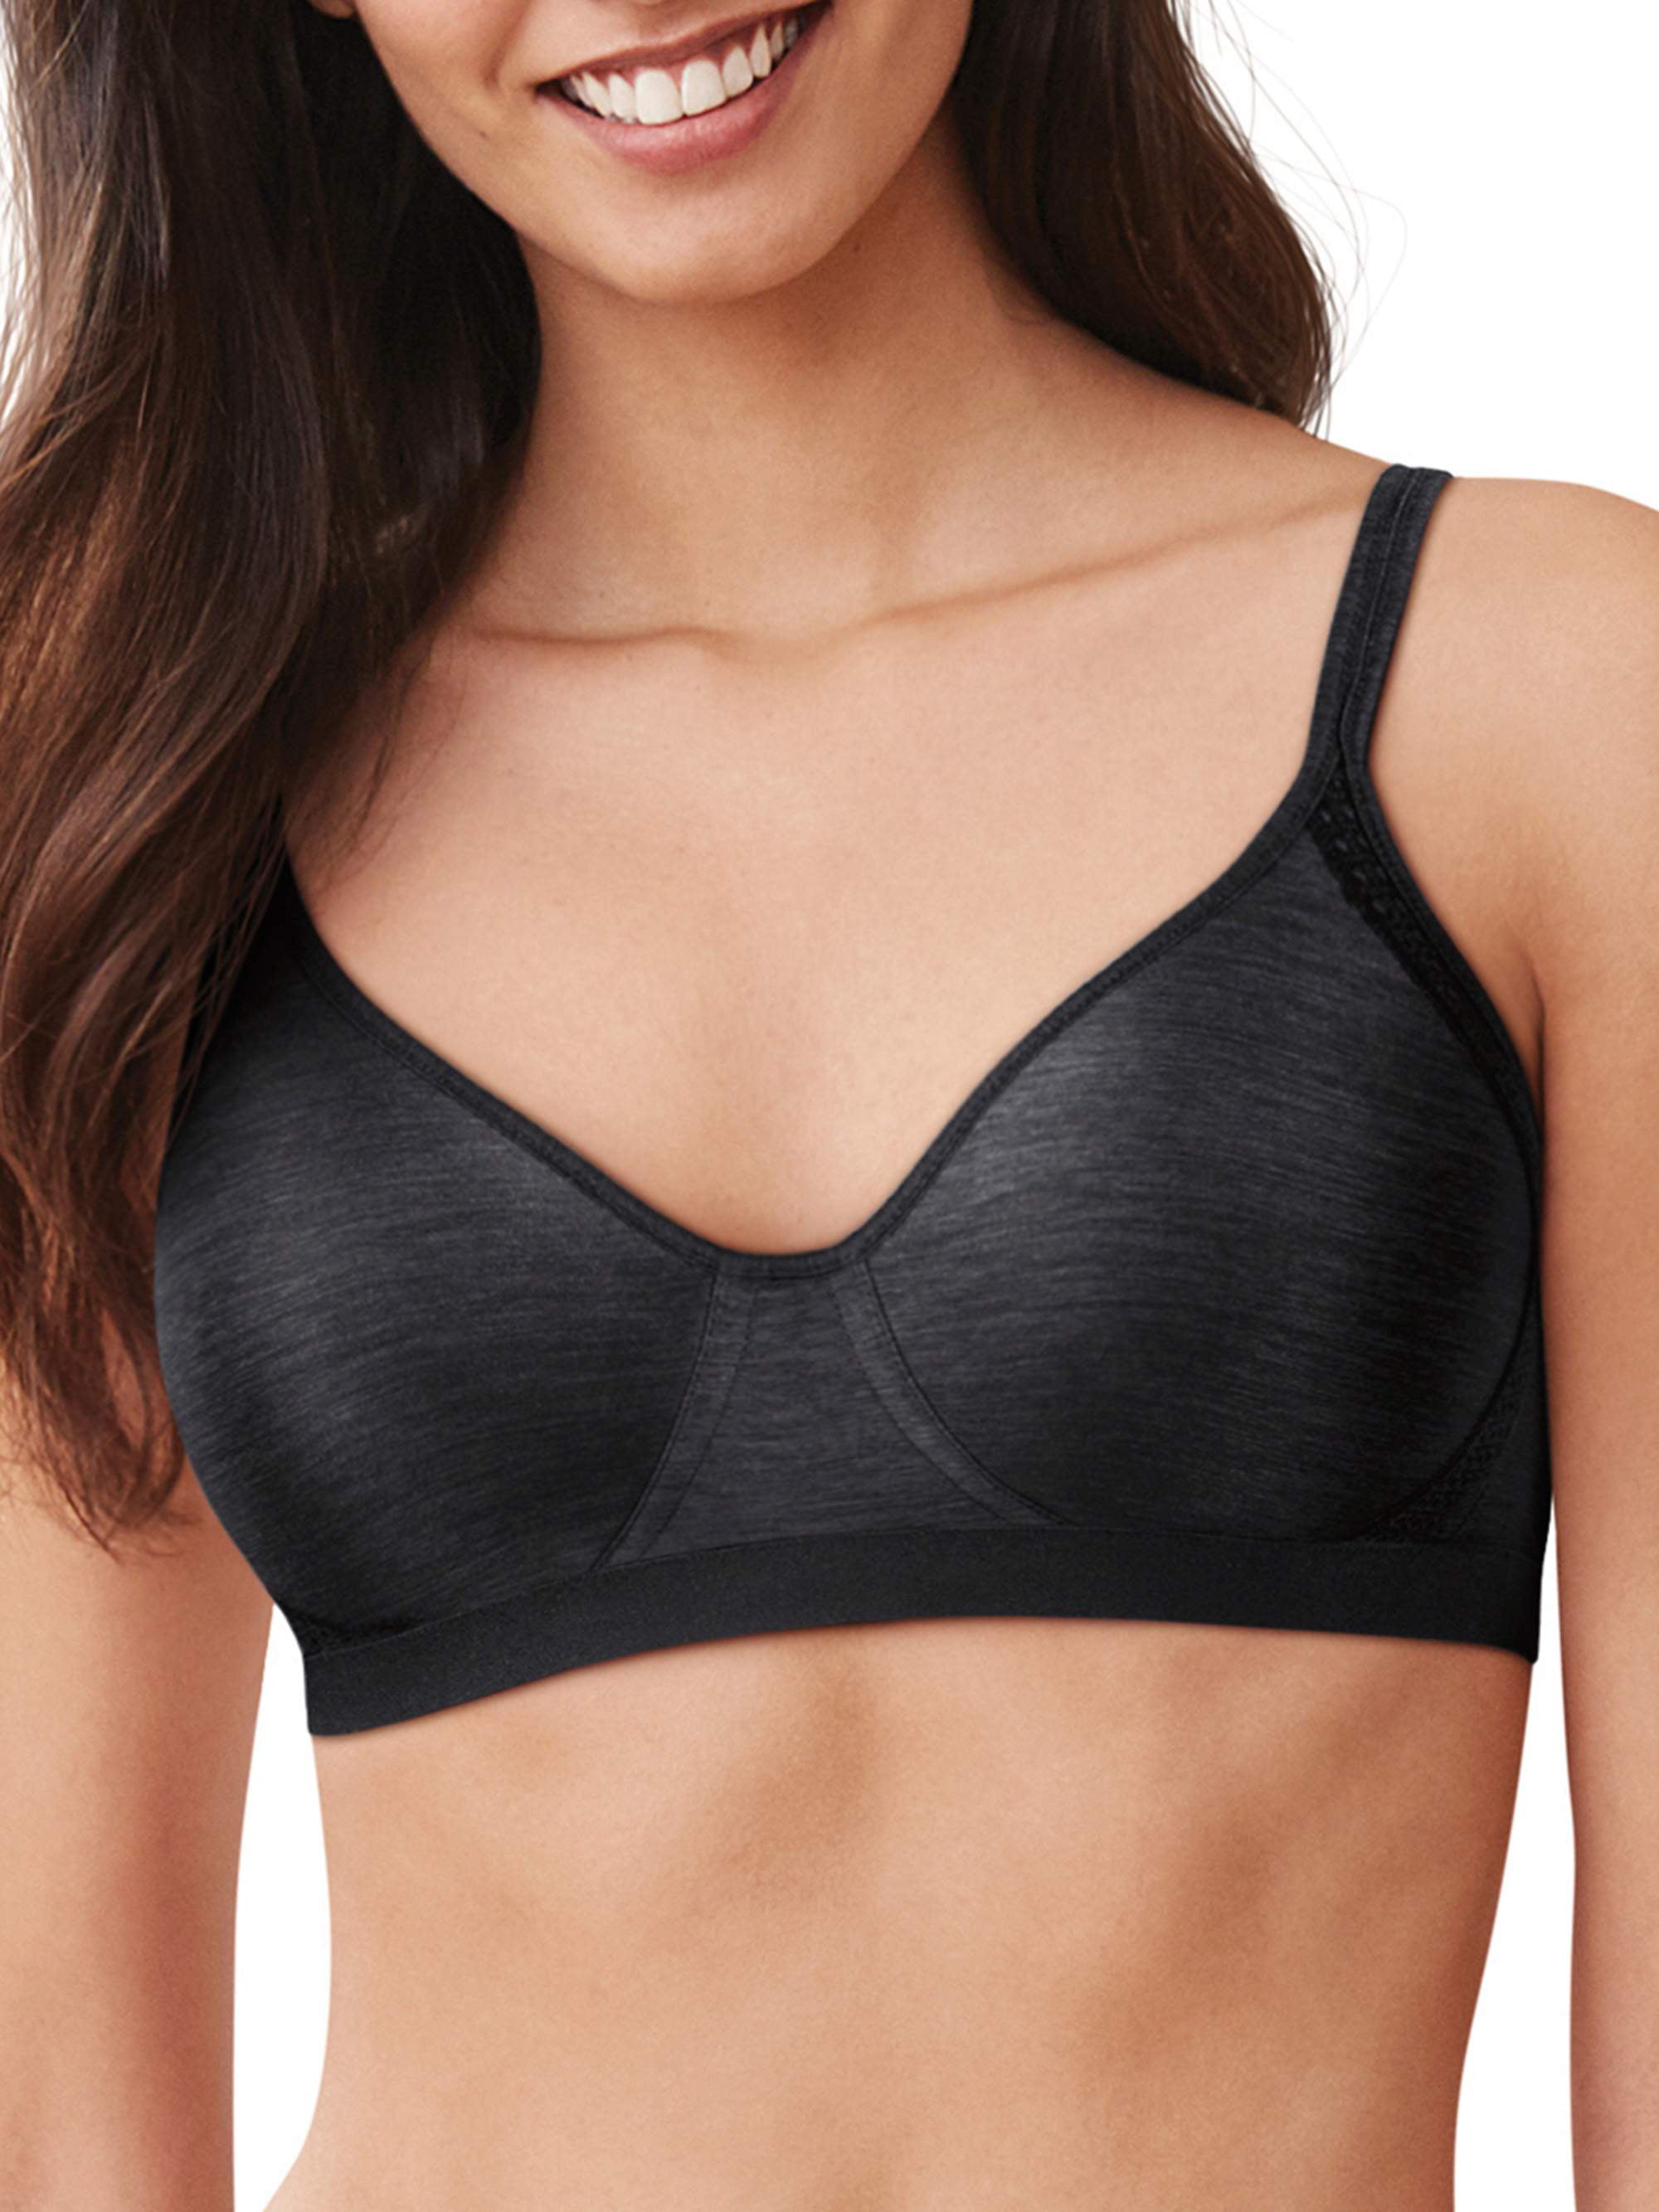 hanes cooling comfort wire free bra